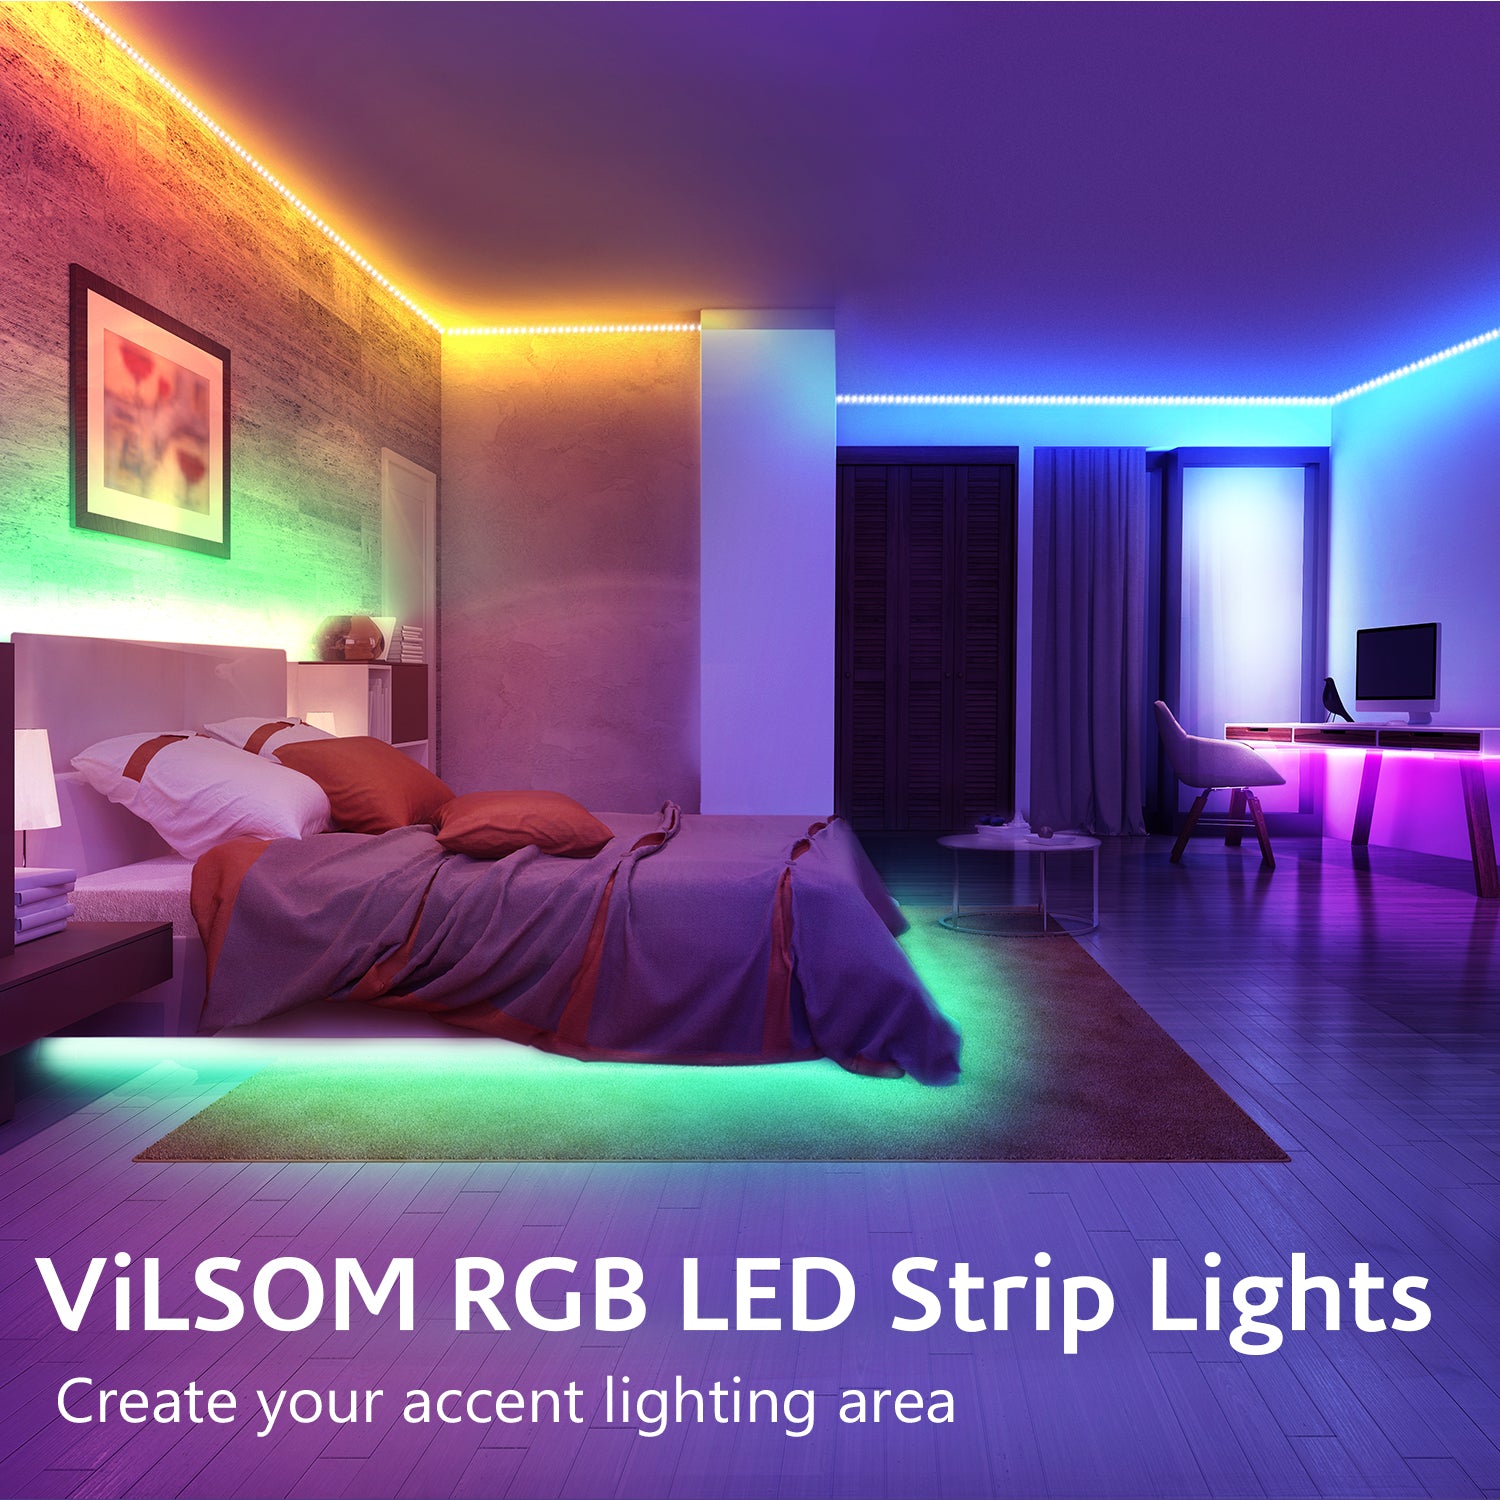 LED Color Changing Strip Lights [16.4'] with Remote Control by ViLSOM. (LNC)